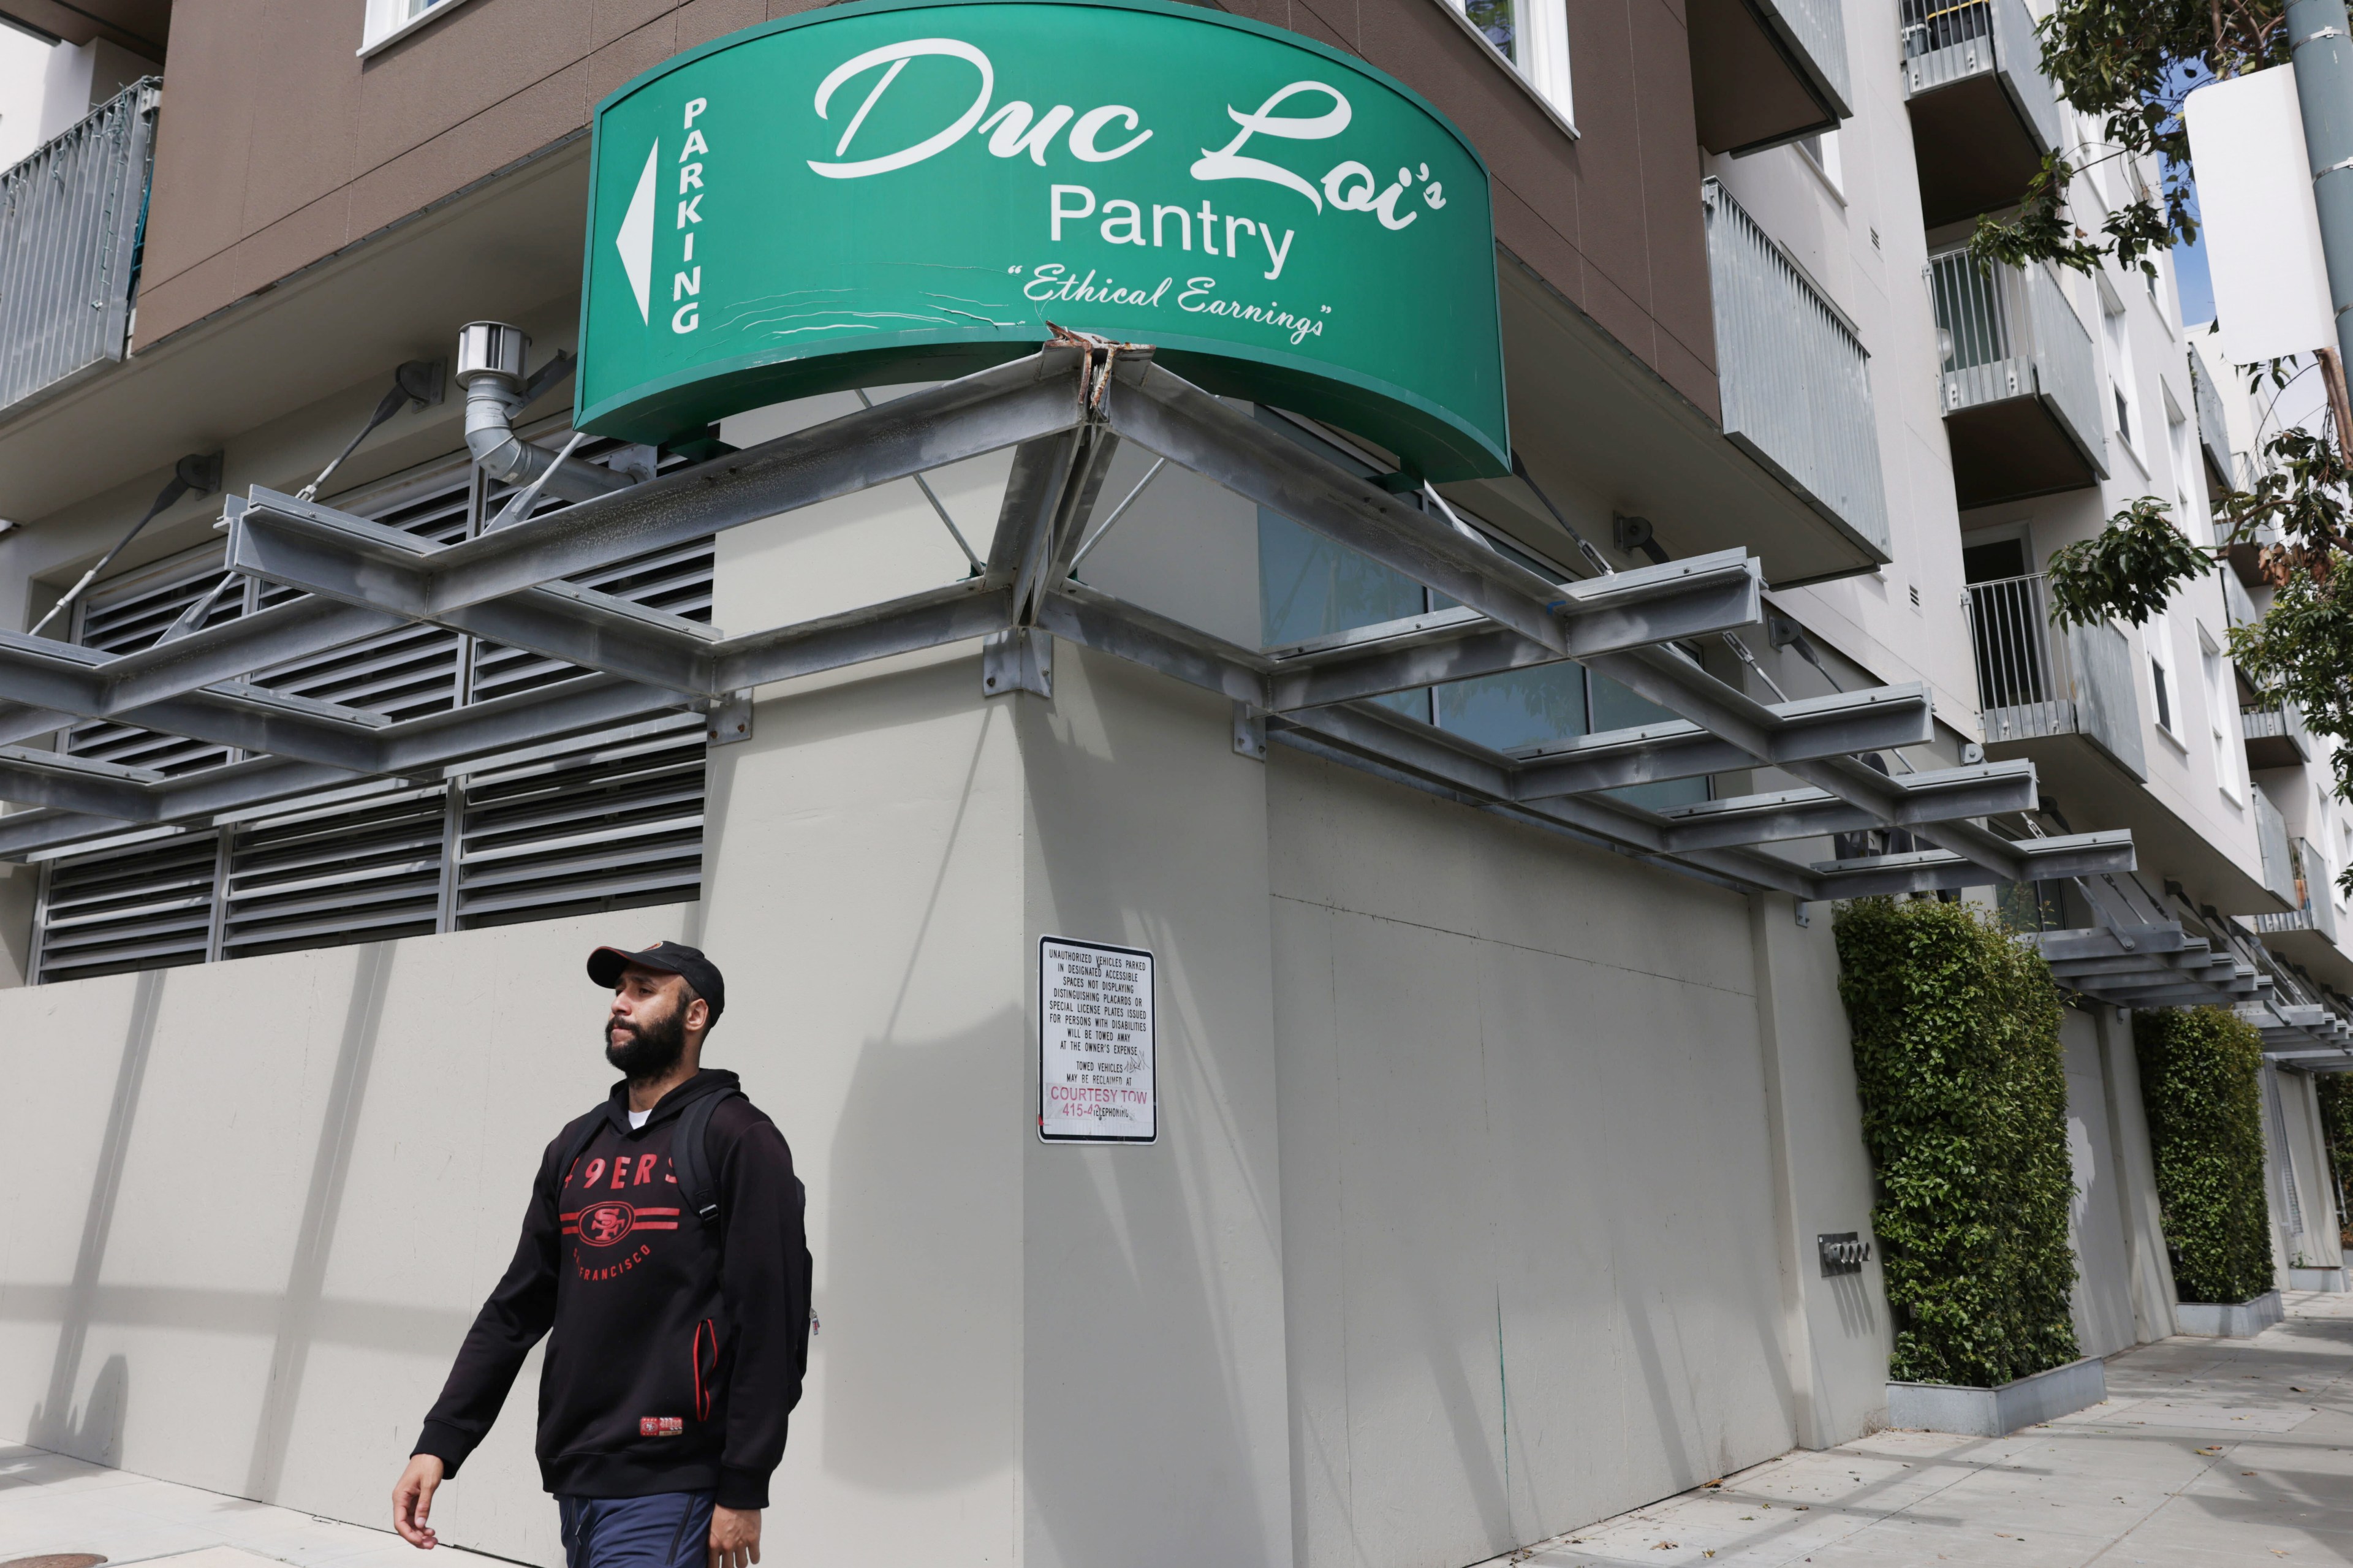 A man walks past a multi-story building with a "Duc Loi's Pantry" parking sign overhead.